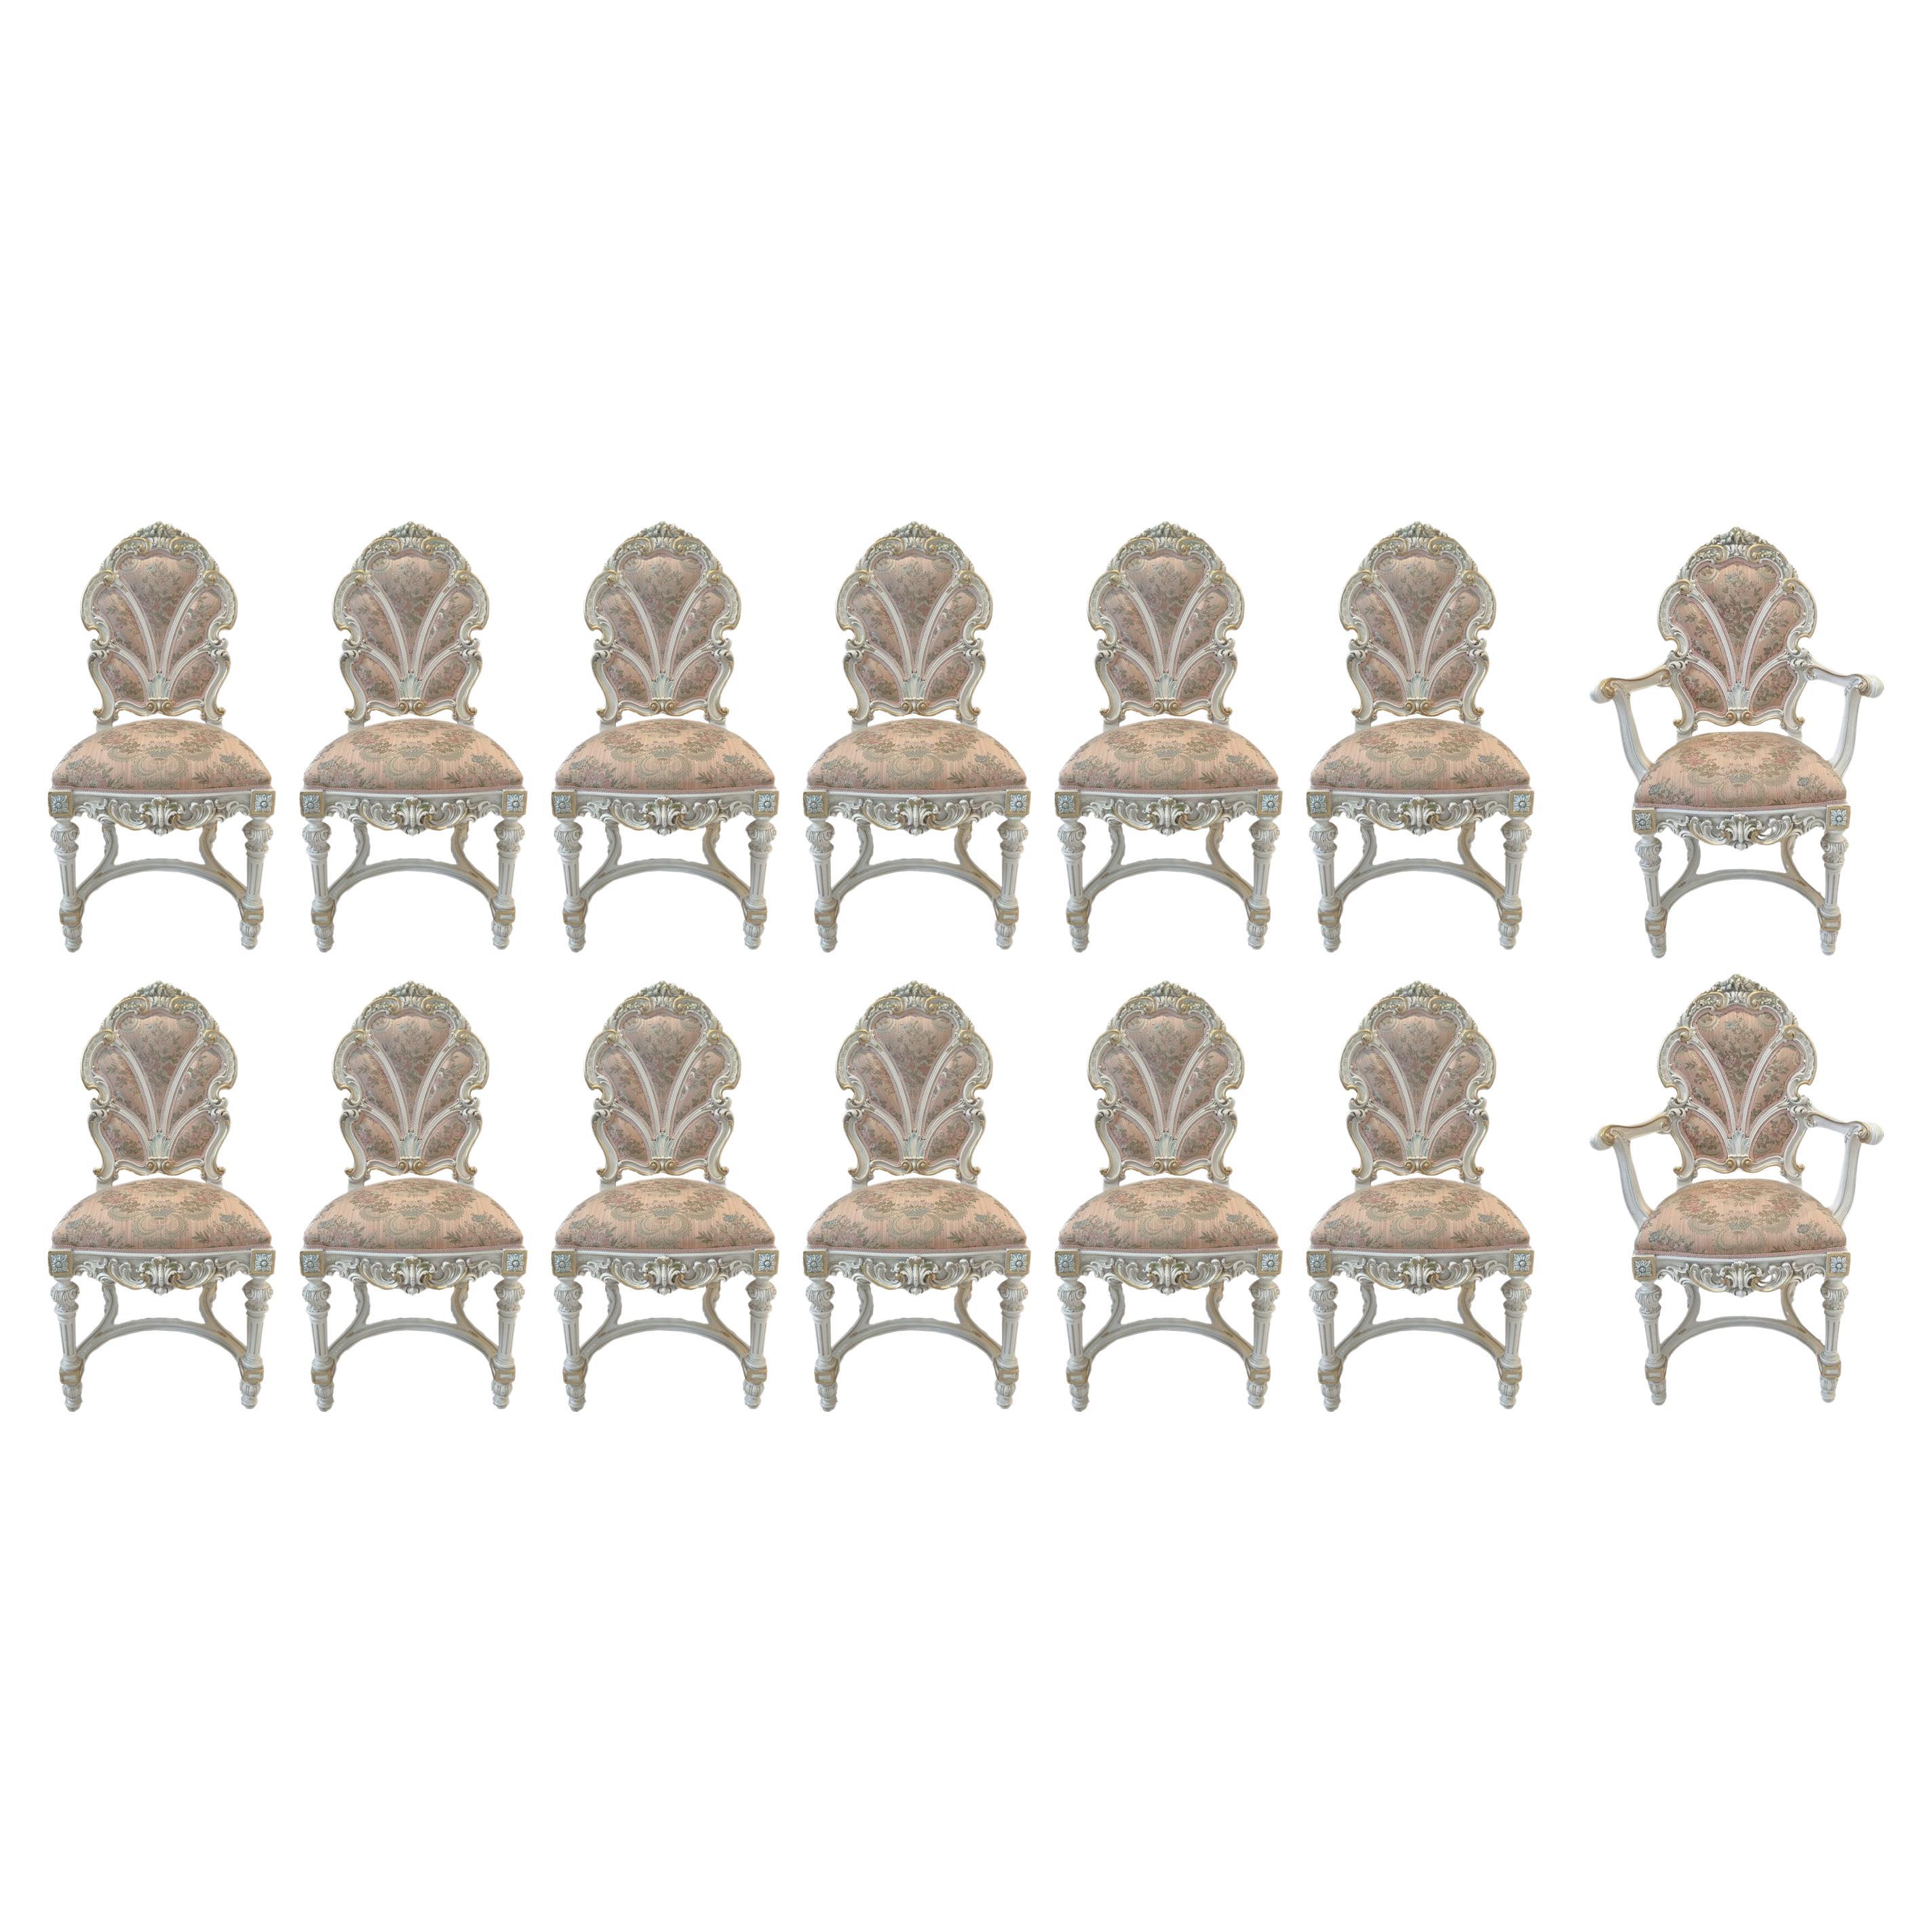 Italian Baroque Style Dining Chair in Antiqued White & Silk Upholstery,  14 pcs  For Sale